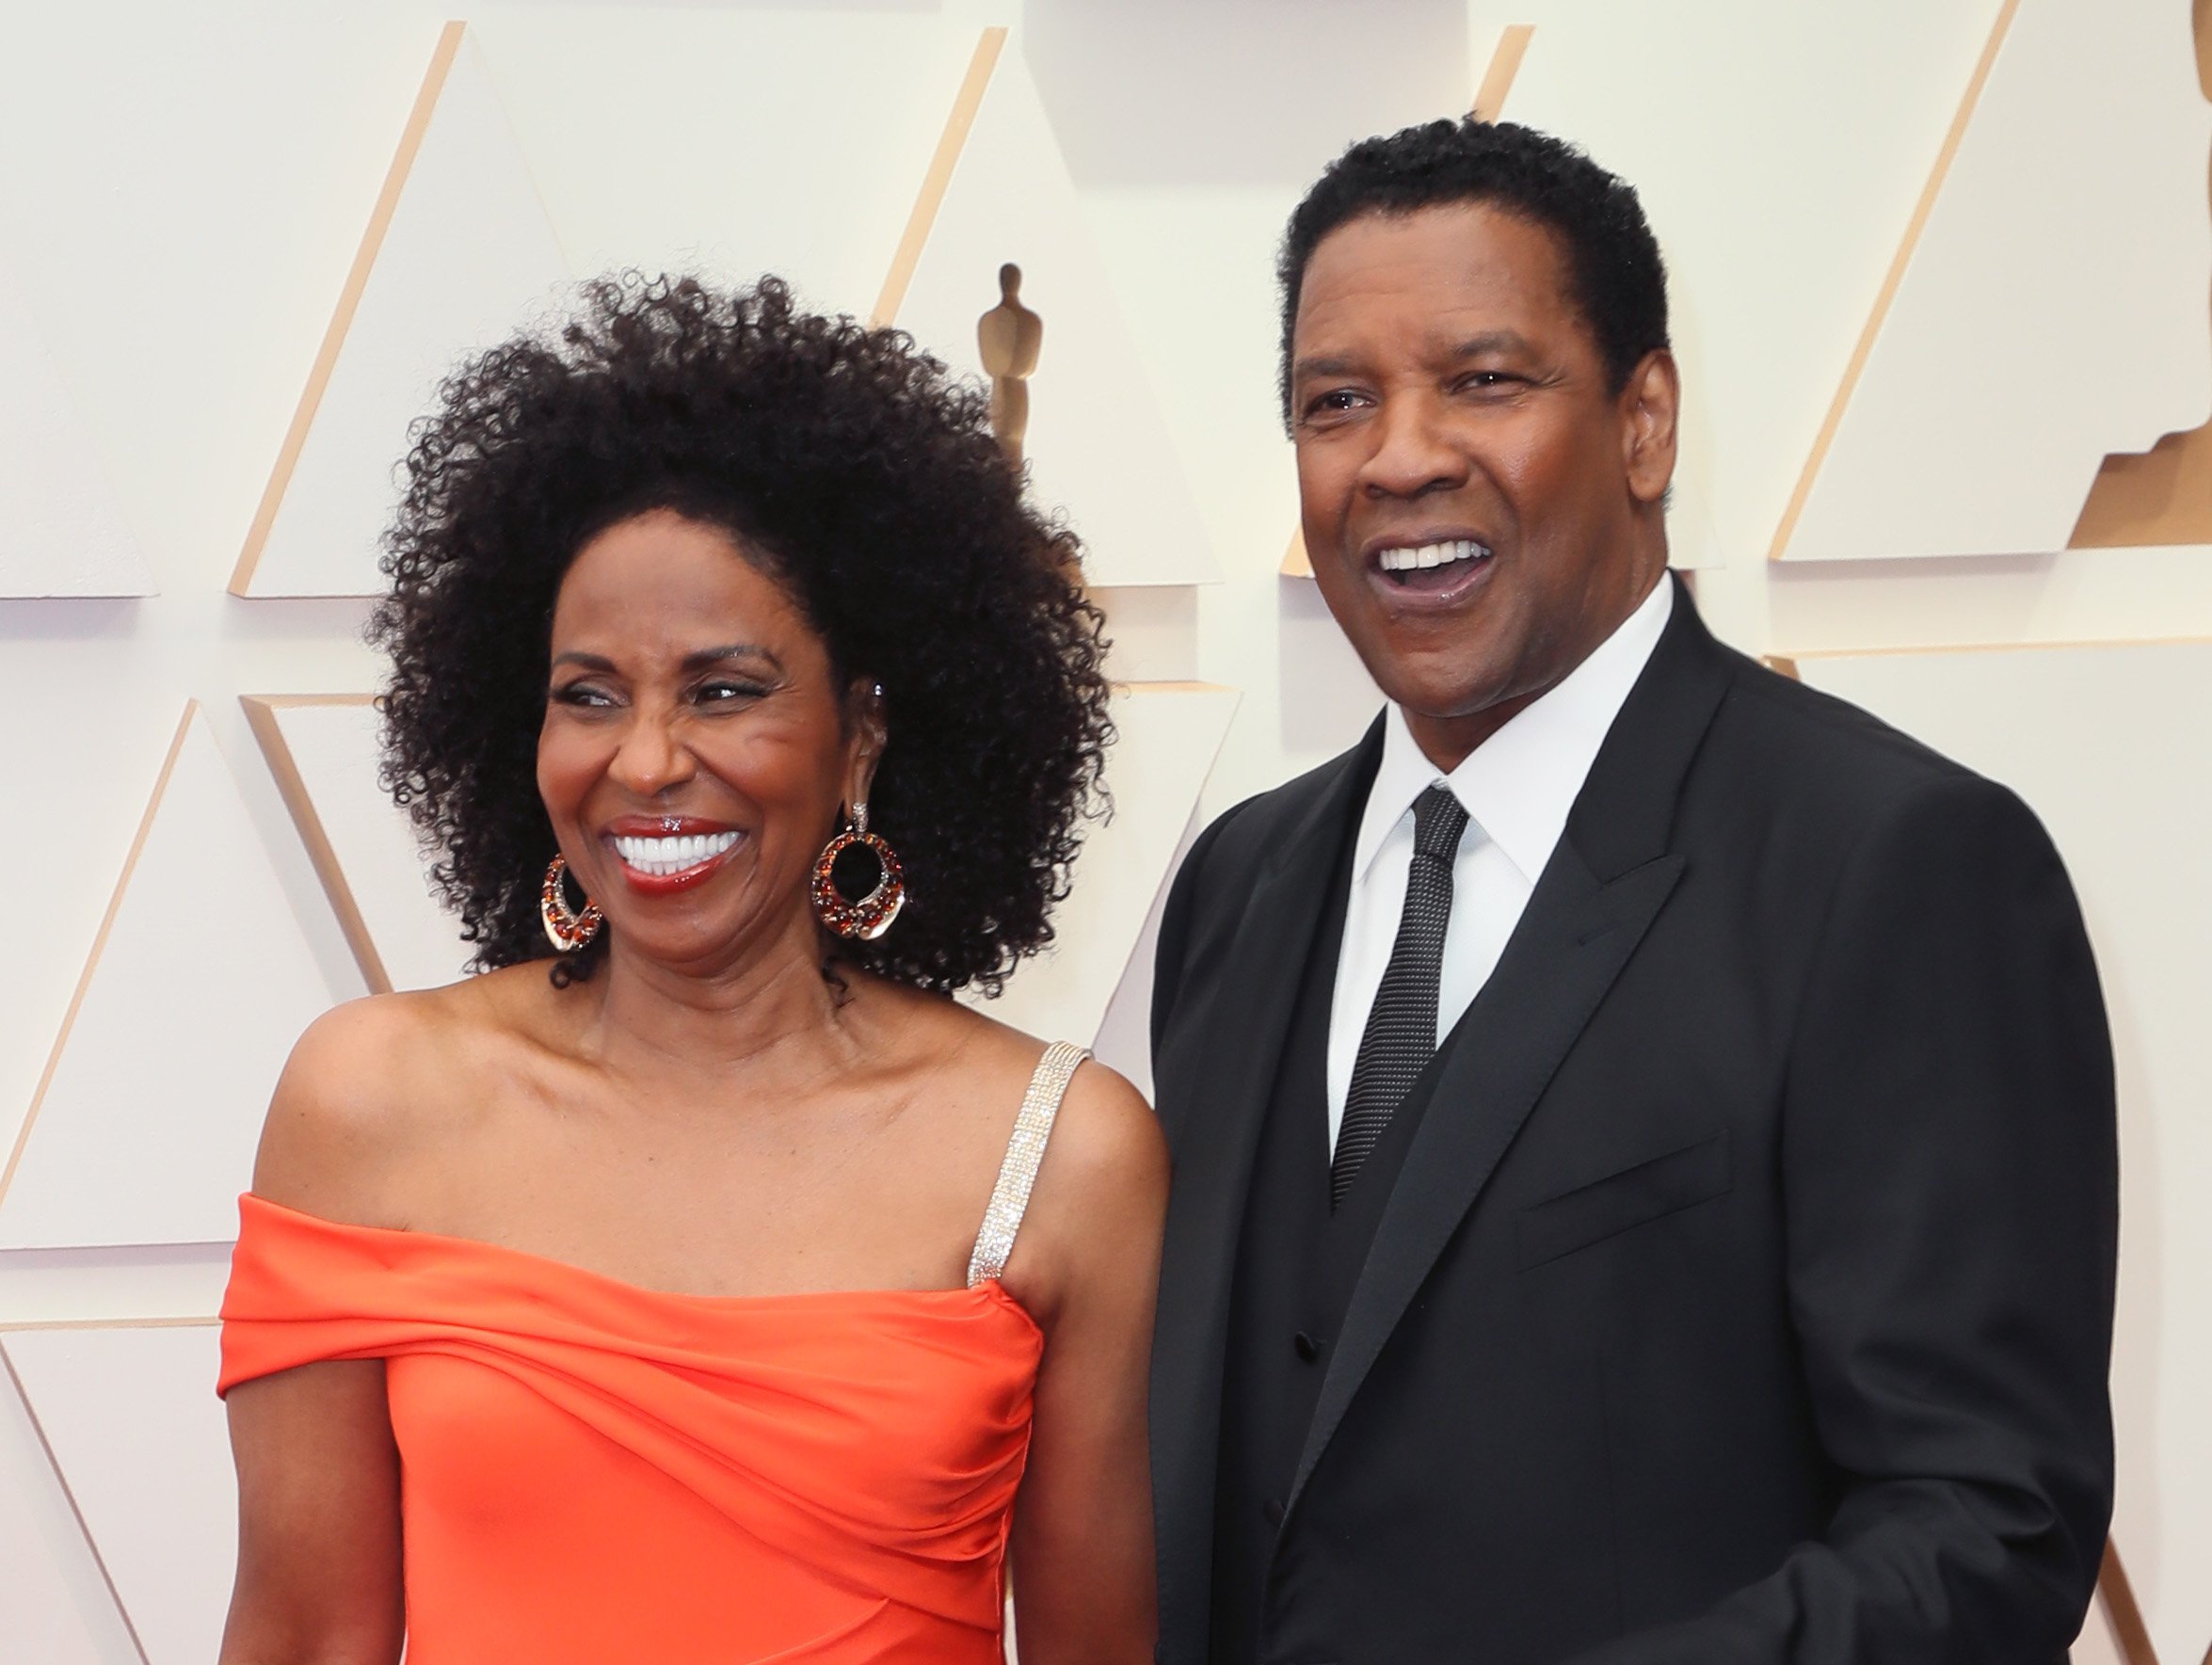 Pauletta Washington and Denzel Washington attend the 94th Annual Academy Awards at Hollywood and Highland on March 27, 2022 in Hollywood, California.  | Source: Getty Images